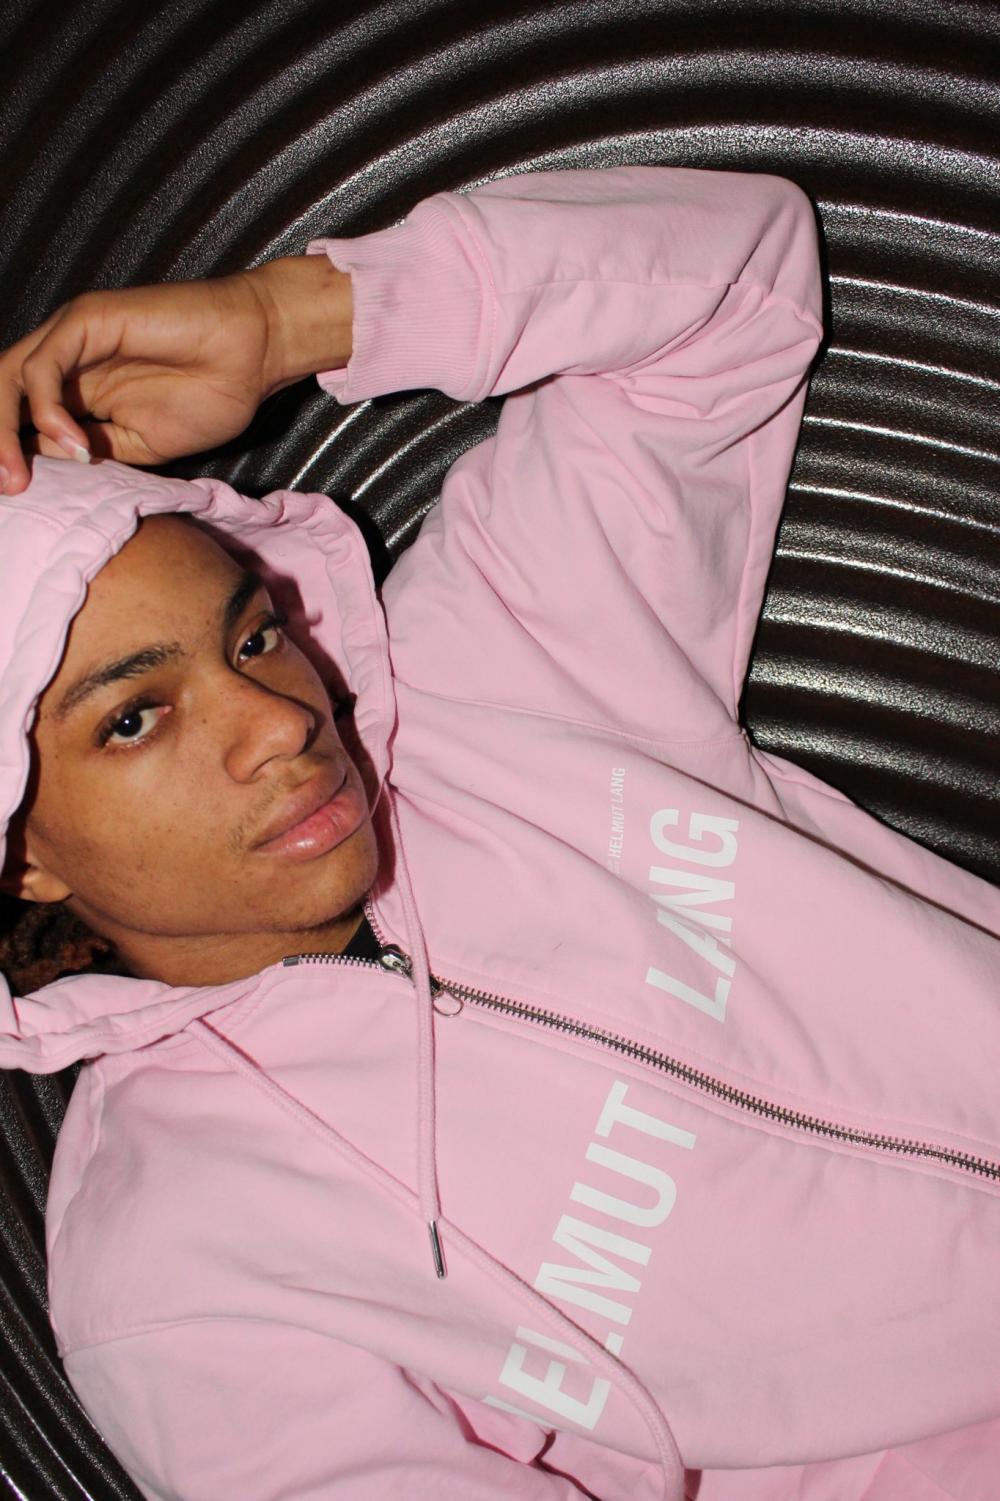 A headshot of Femi Boirard wearing a pink hoodie and posing with his left arm up near his head.